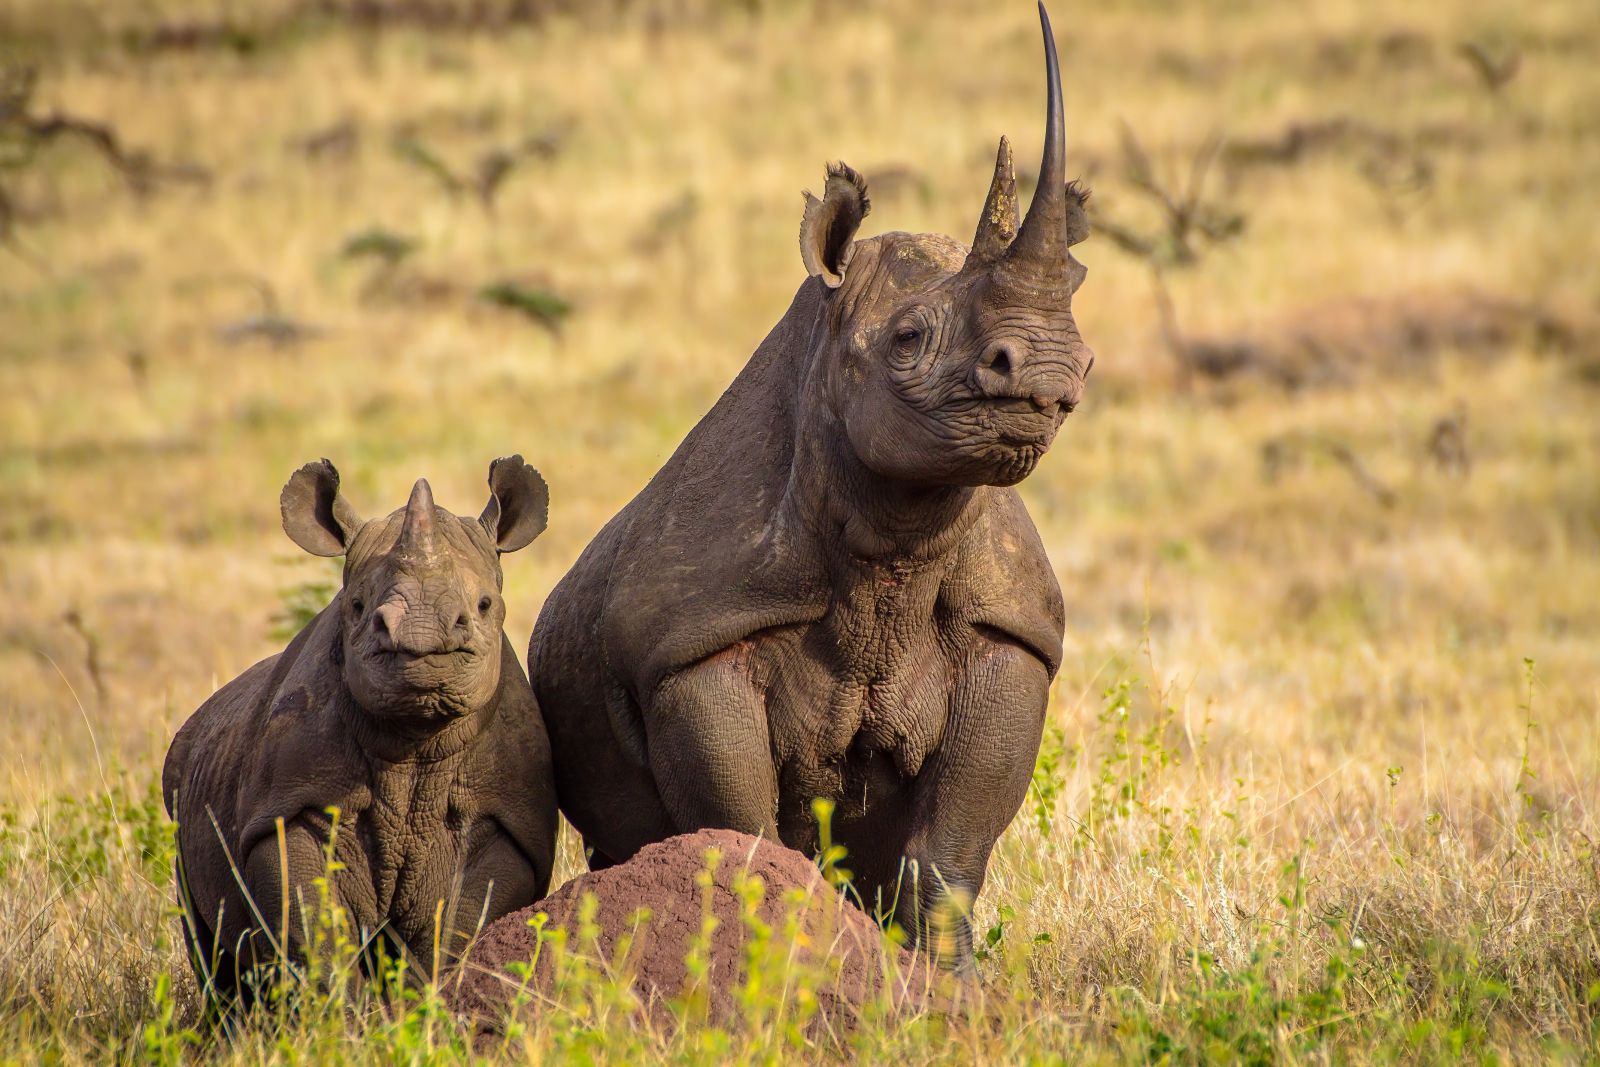 Mother and baby rhino in the Lewa conservancy in Kenya